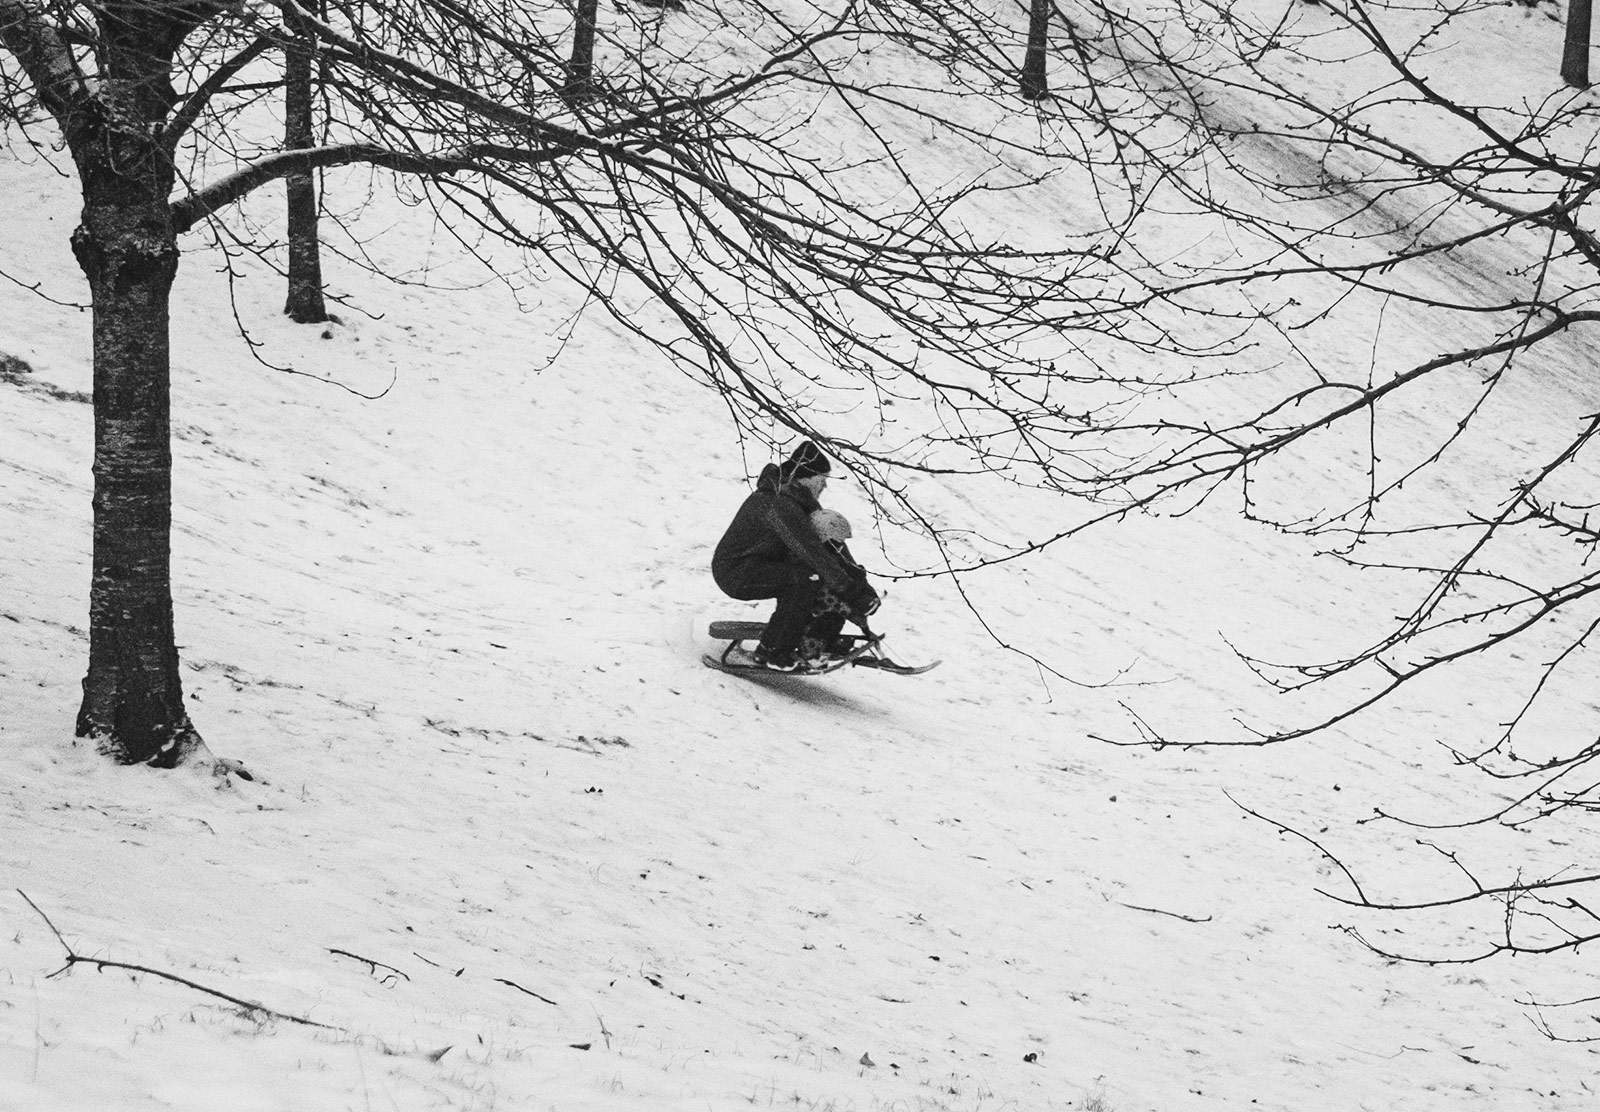 Man and child on sledge